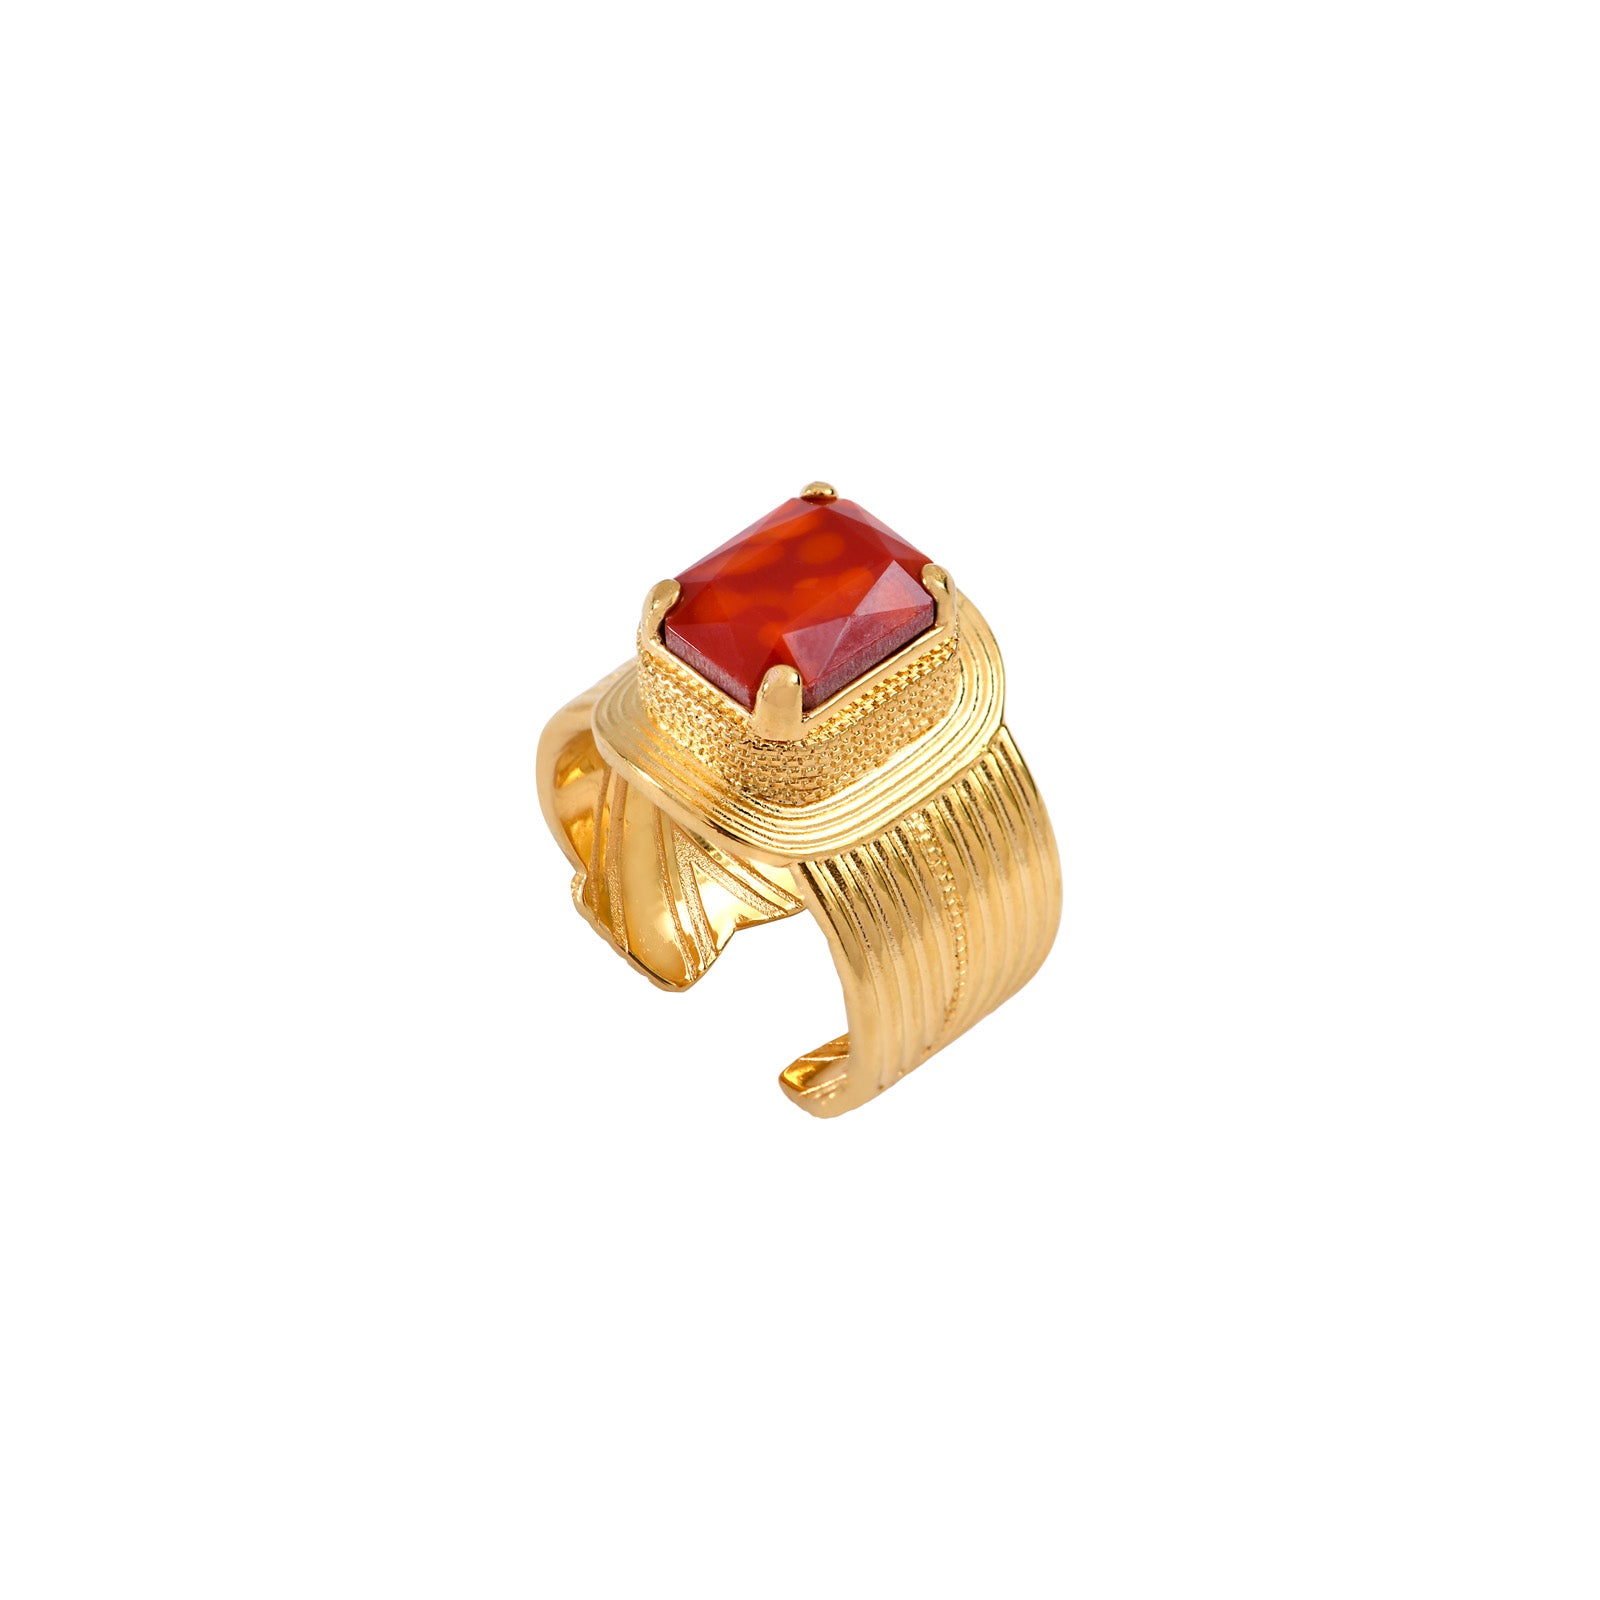 Art Deco style ring in red